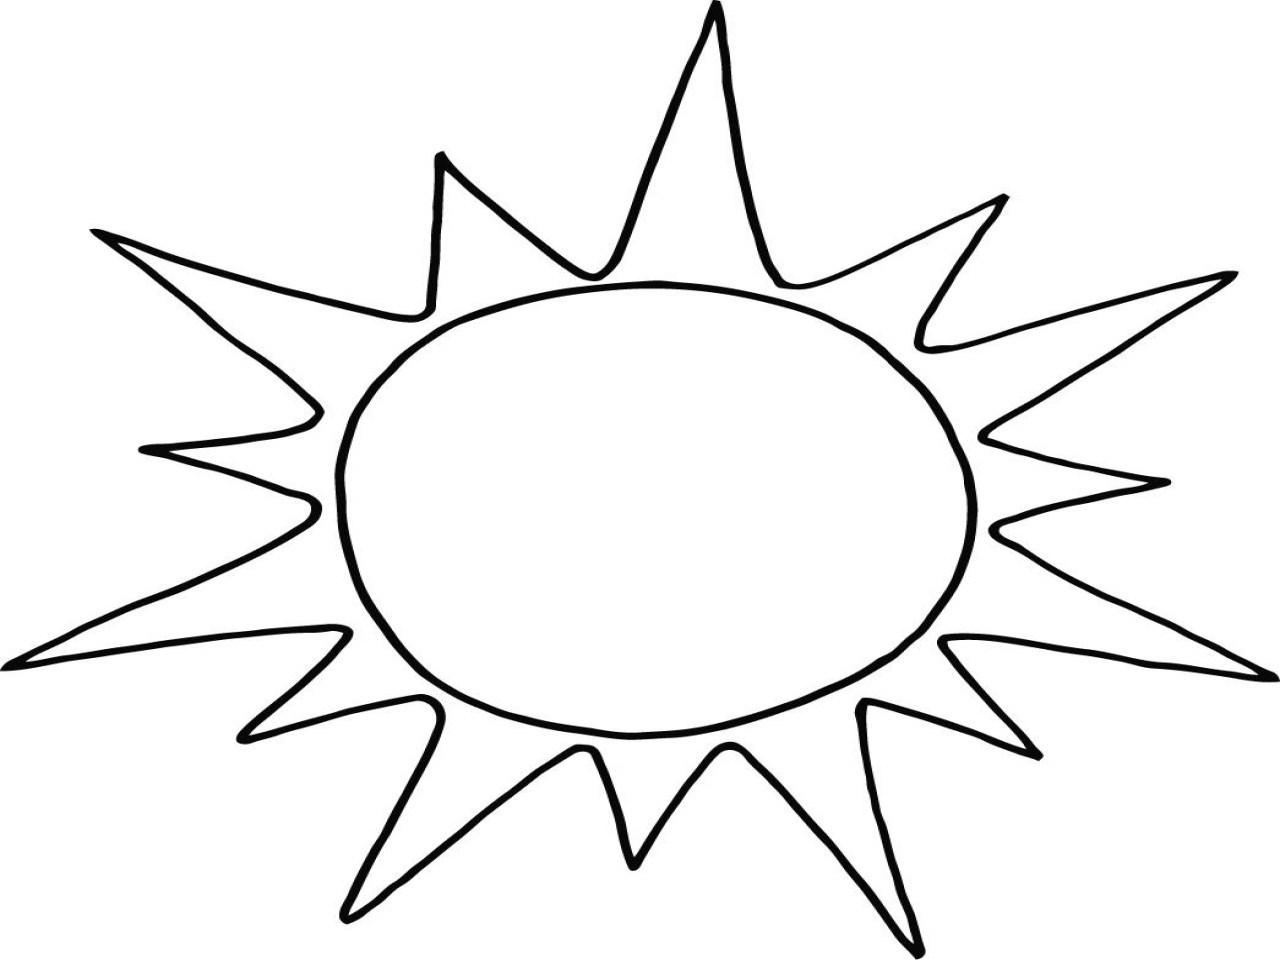 Free Sunshine Preschool Coloring Sheets
 Sun Coloring Pages To Print For Kids grig3